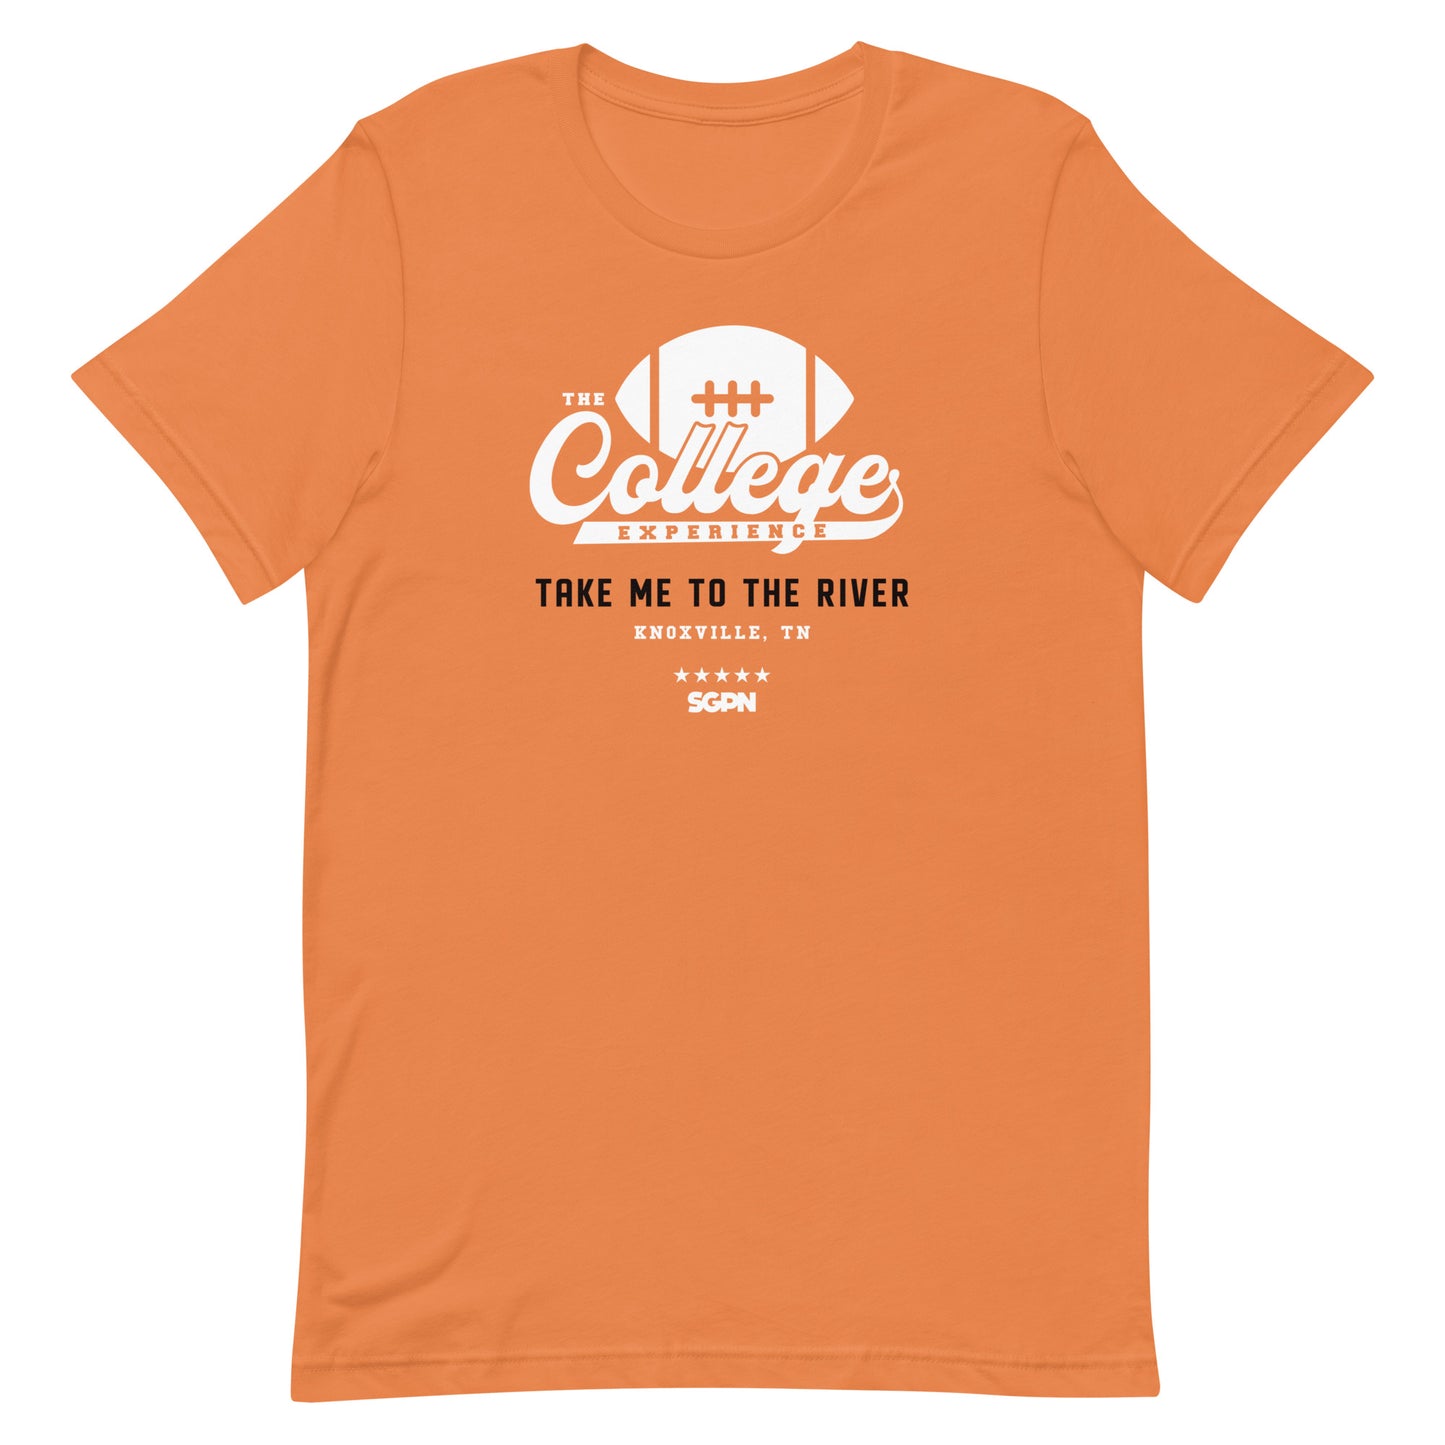 The College Football Experience - Knoxville special edition: TAKE ME TO THE RIVER - Burnt Orange Short sleeve t-shirt